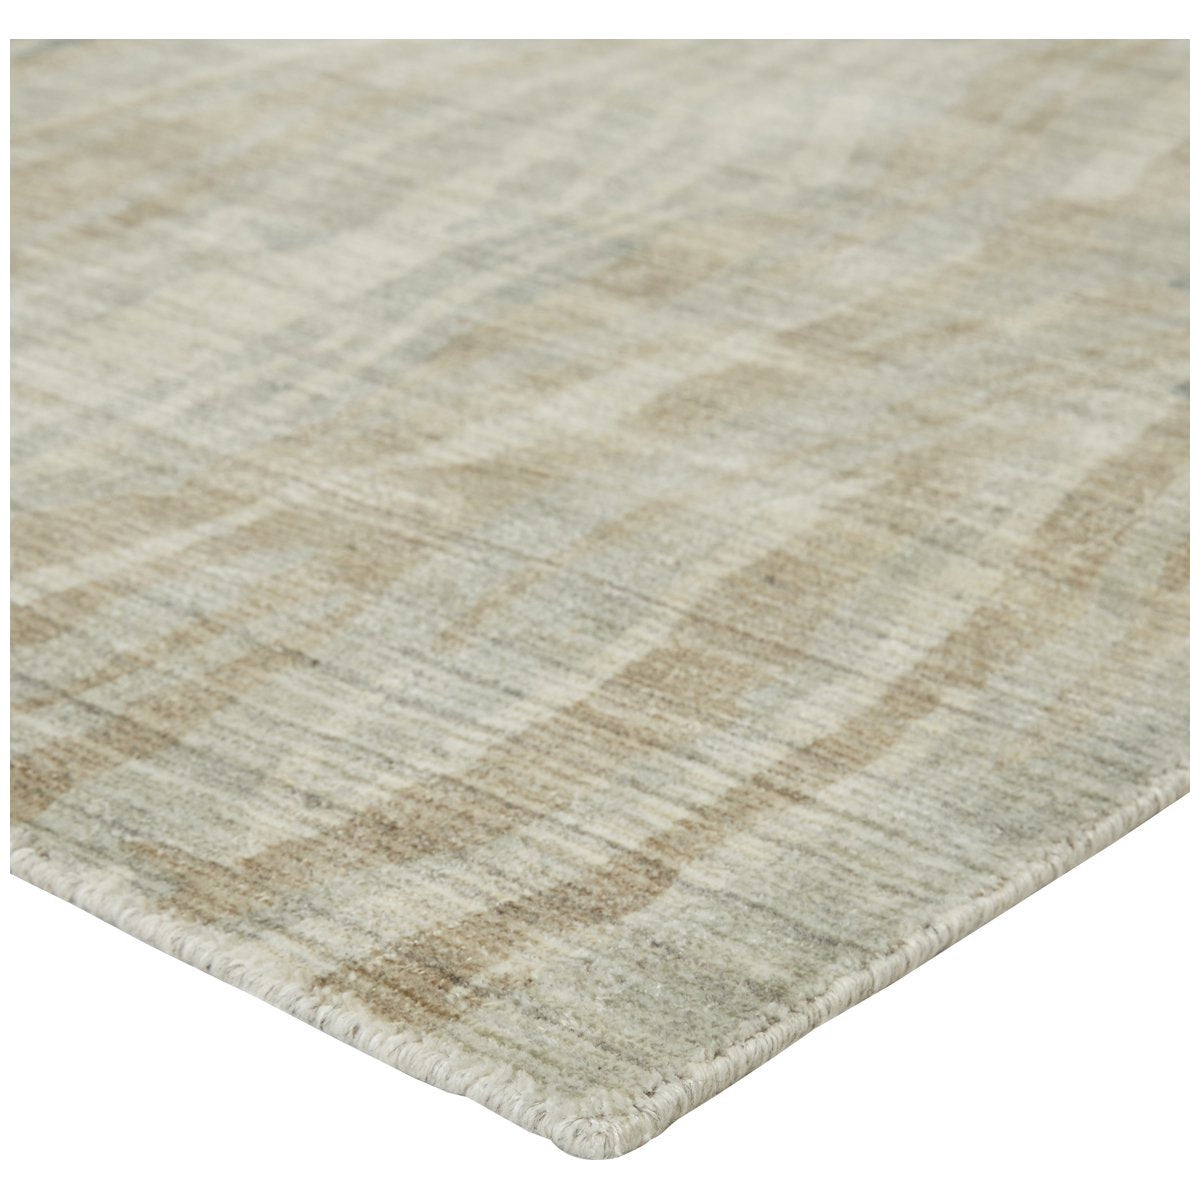 Jaipur Brentwood by Barclay Butera Barrington Abstract Beige BBB05 Rug